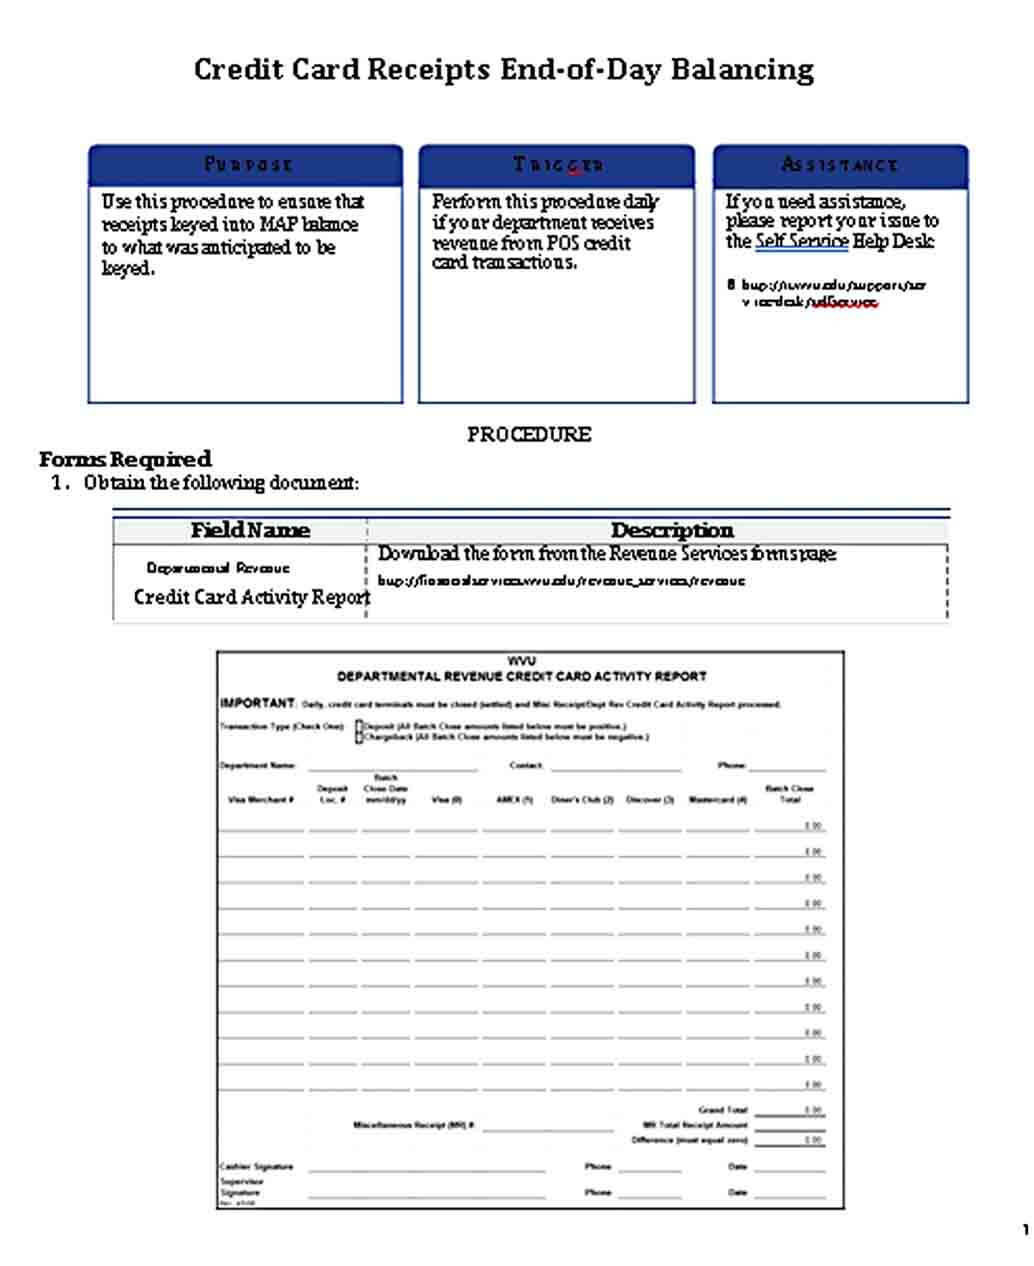 End of Day Credit Card Receipt Form 1